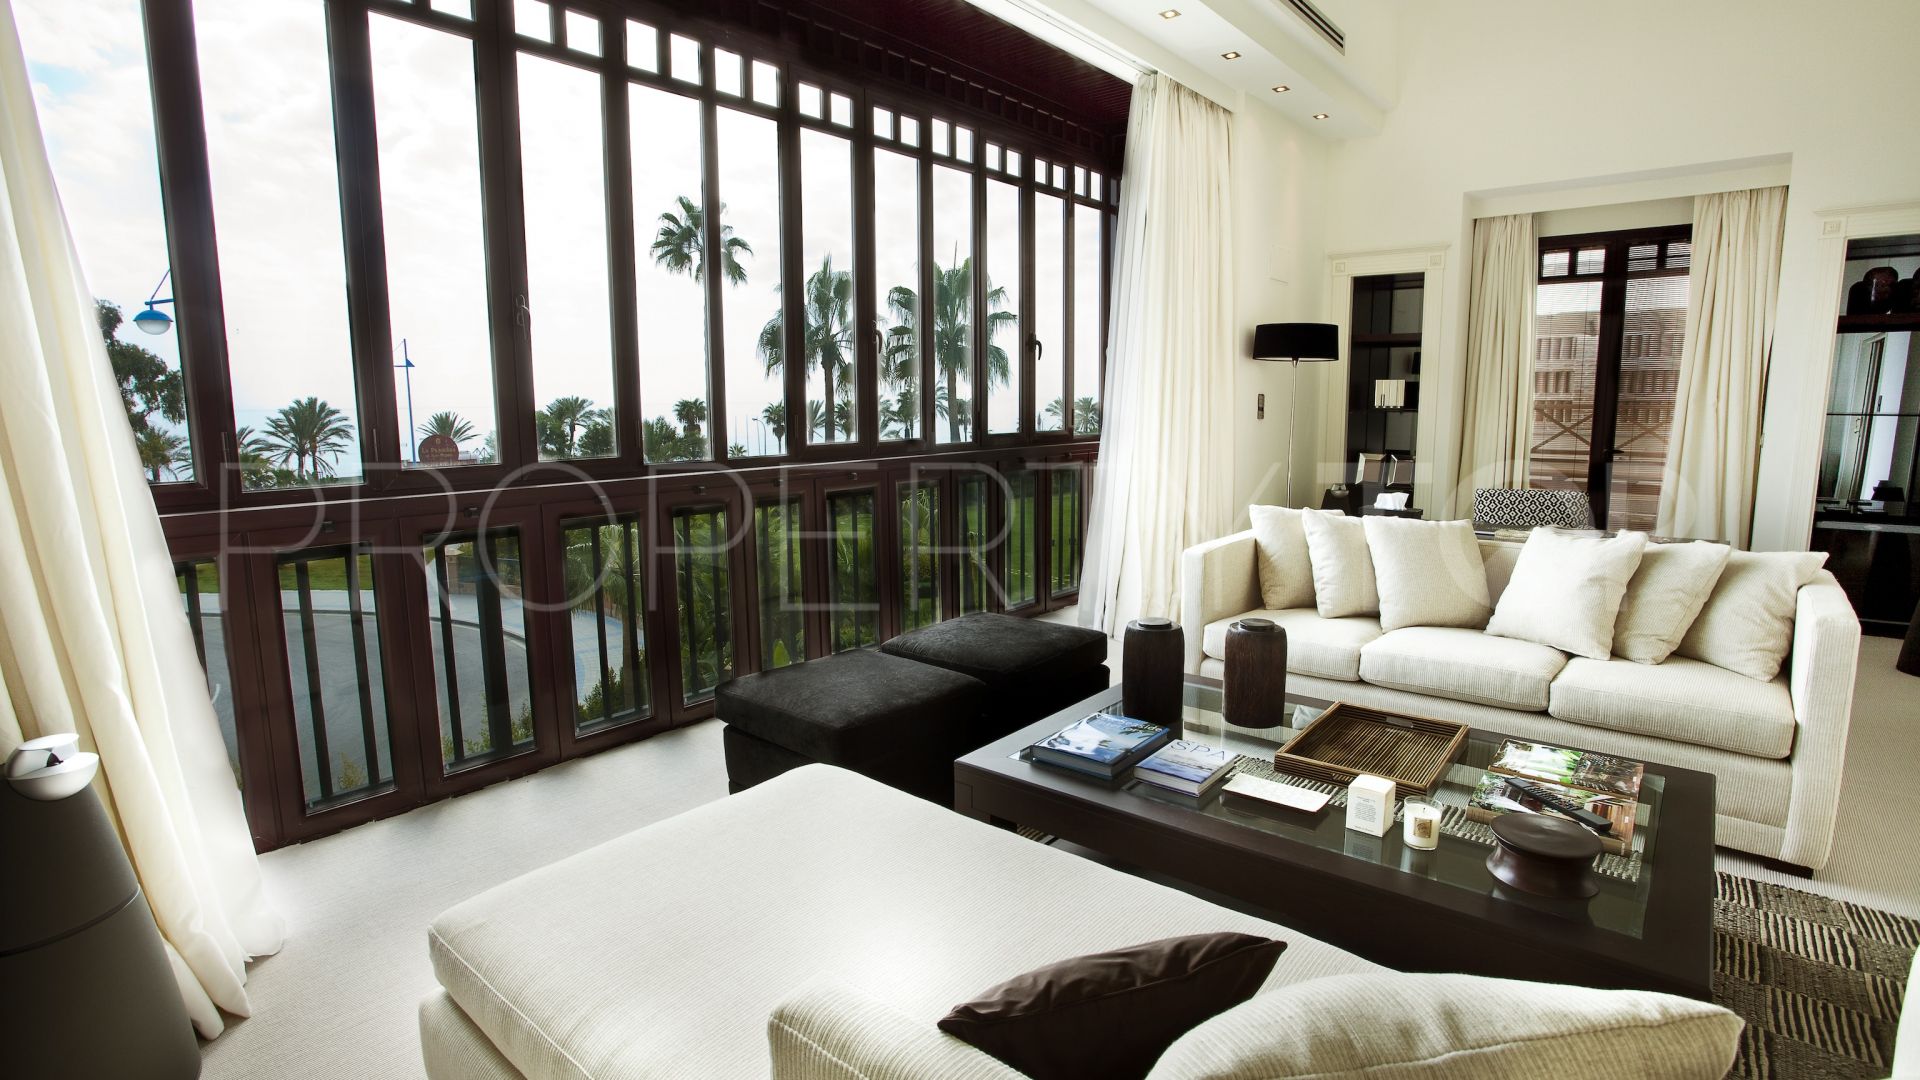 For sale triplex with 7 bedrooms in Casablanca Beach